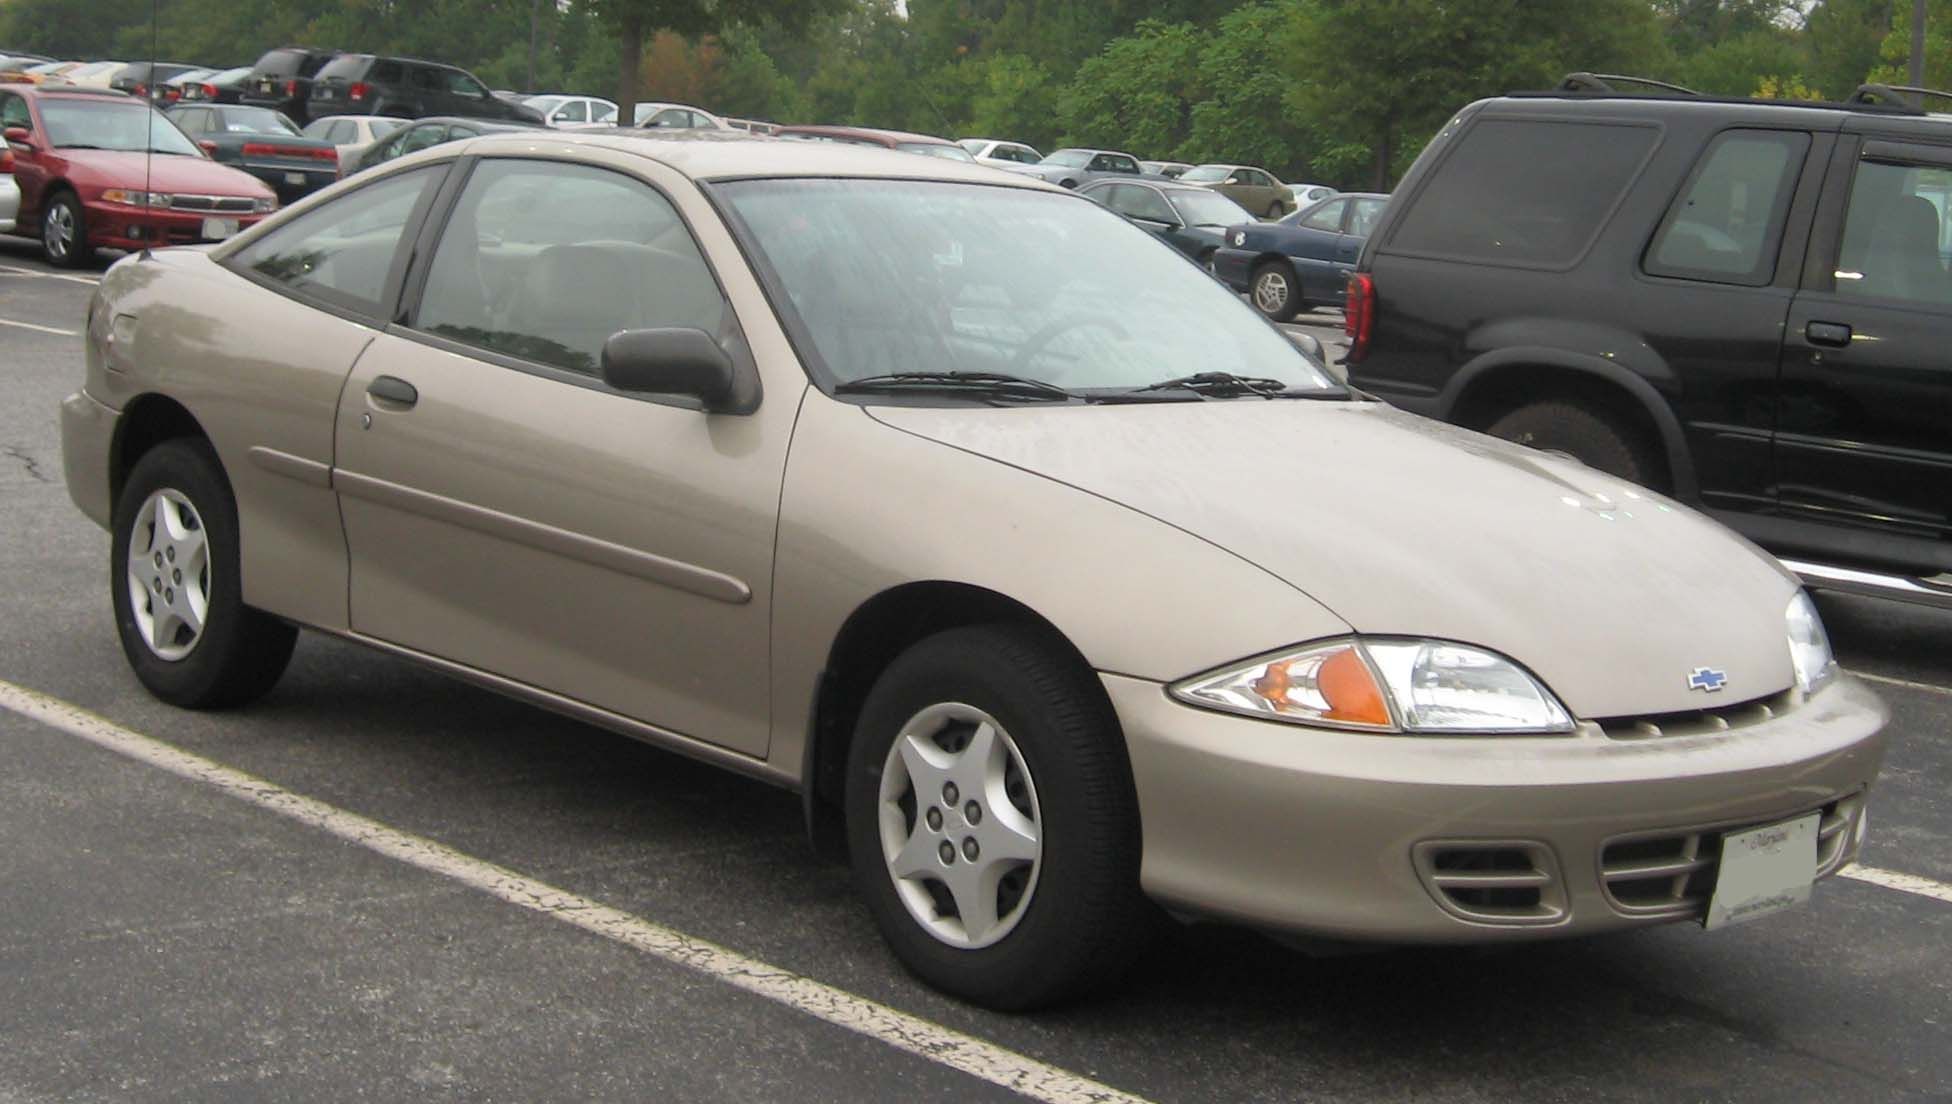 2000 Chevy Cavalier - first vehicle I owned I actually had to pay for. Mine  looked like this but had an uber-sporty tail fin on the back.